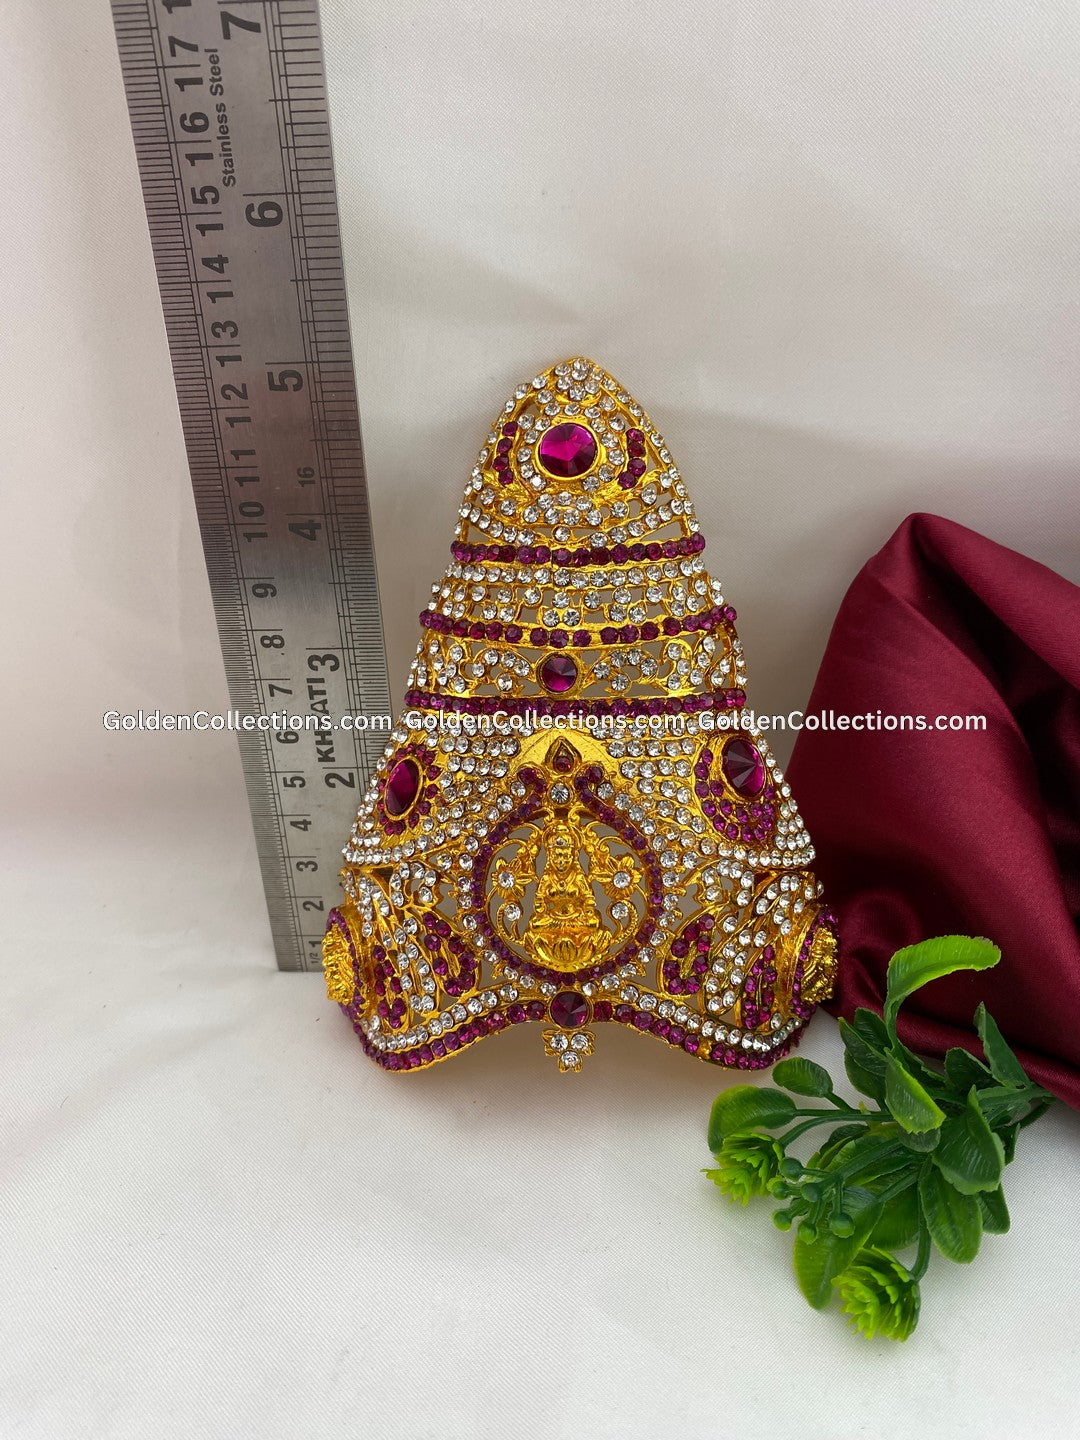 Hindu Deity Crown with Intricate Design - GoldenCollections DGC-069 2